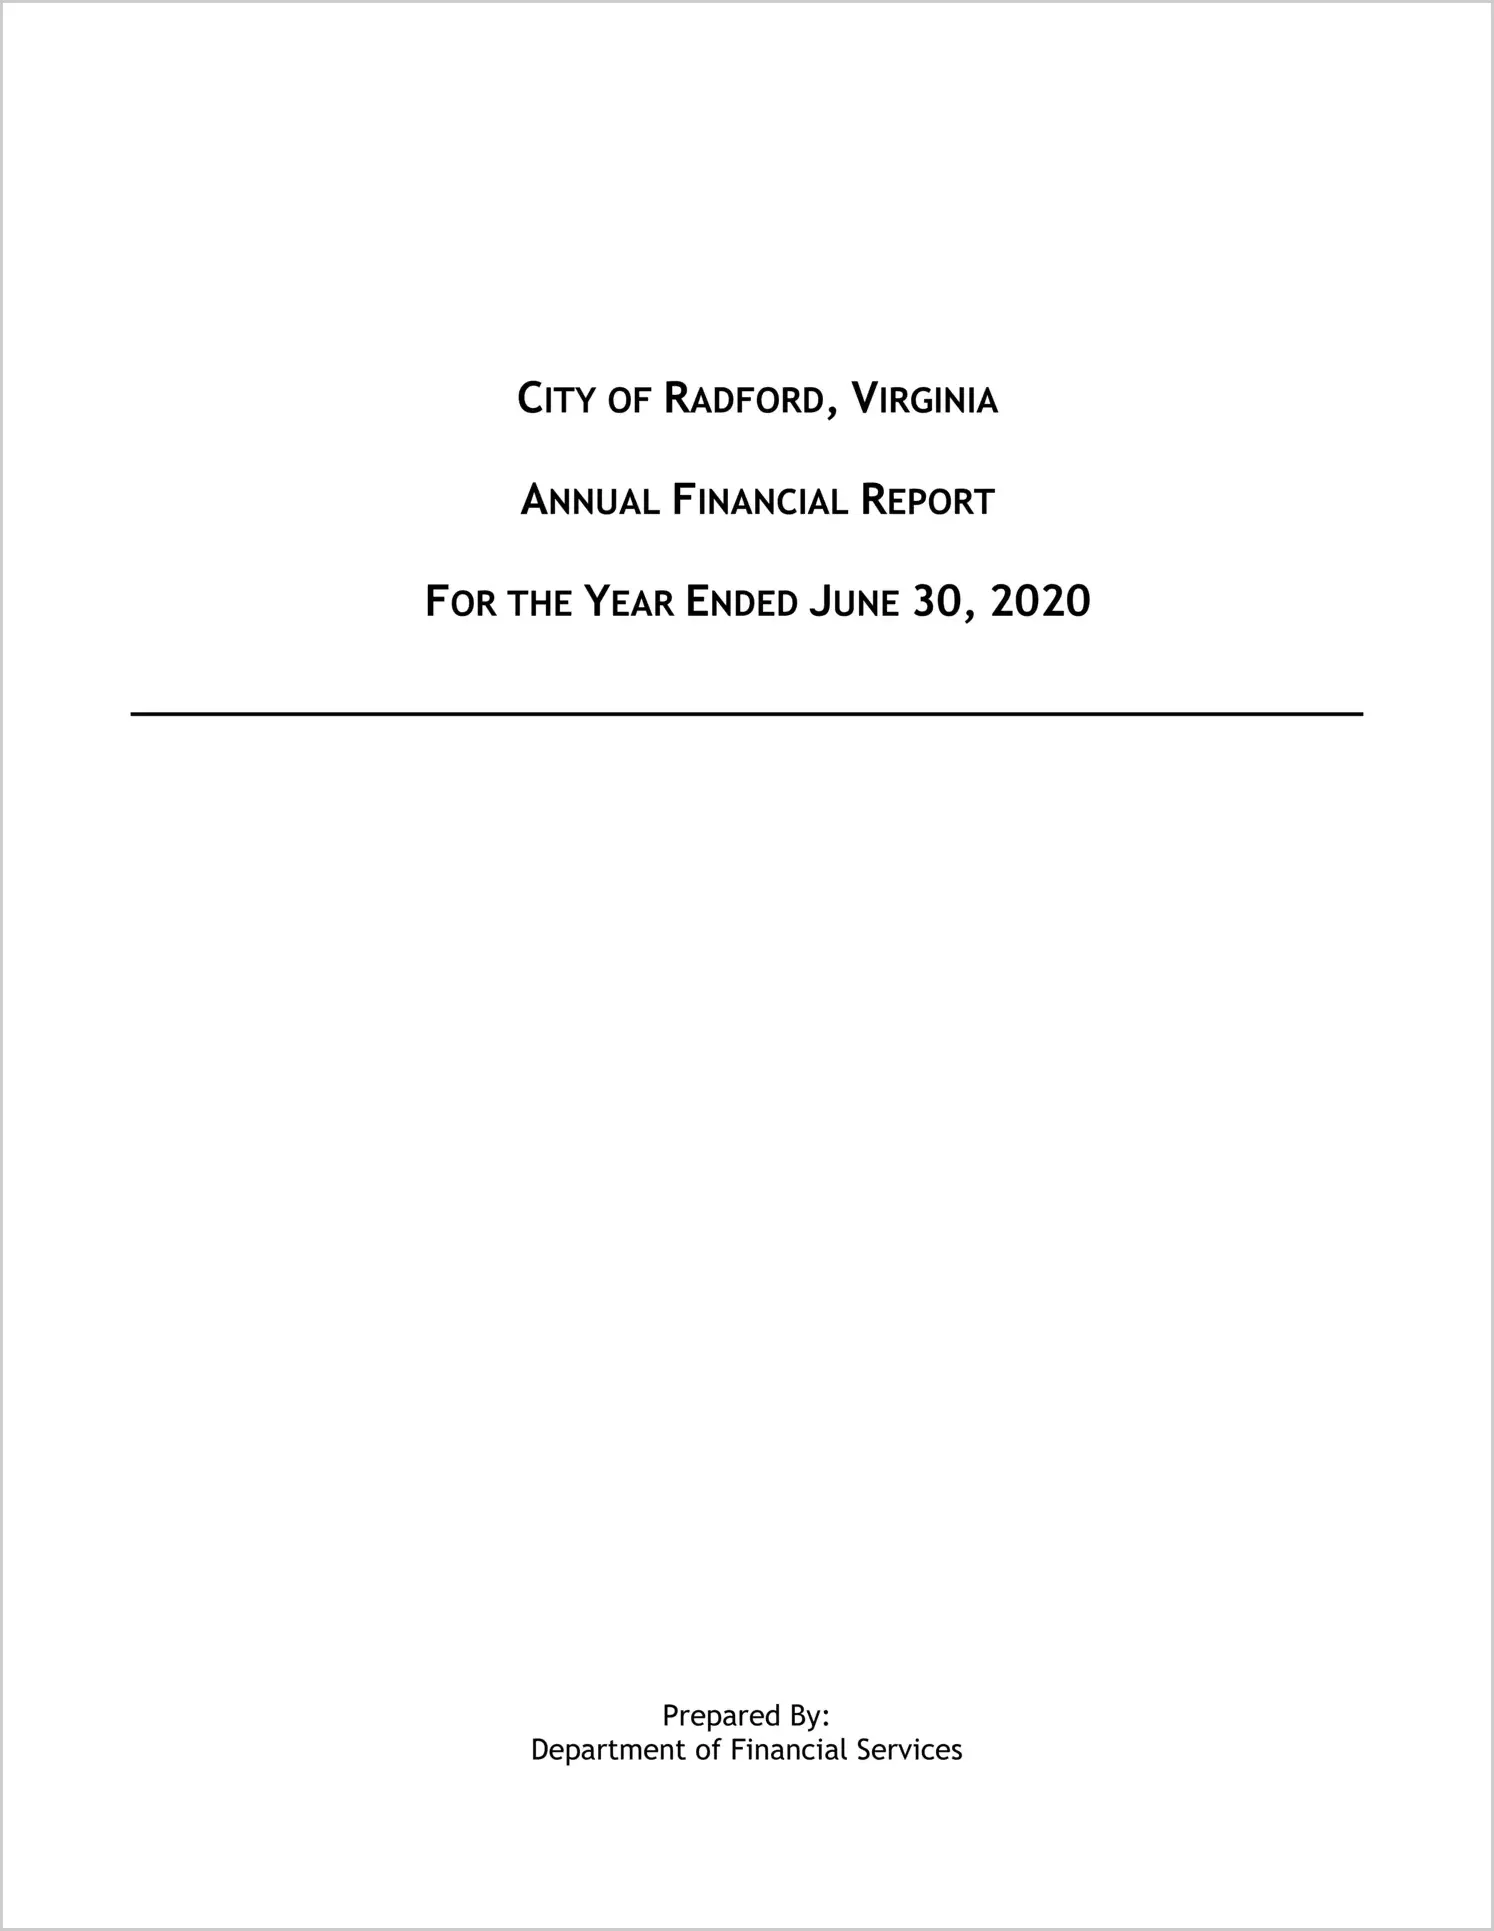 2020 Annual Financial Report for City of Radford